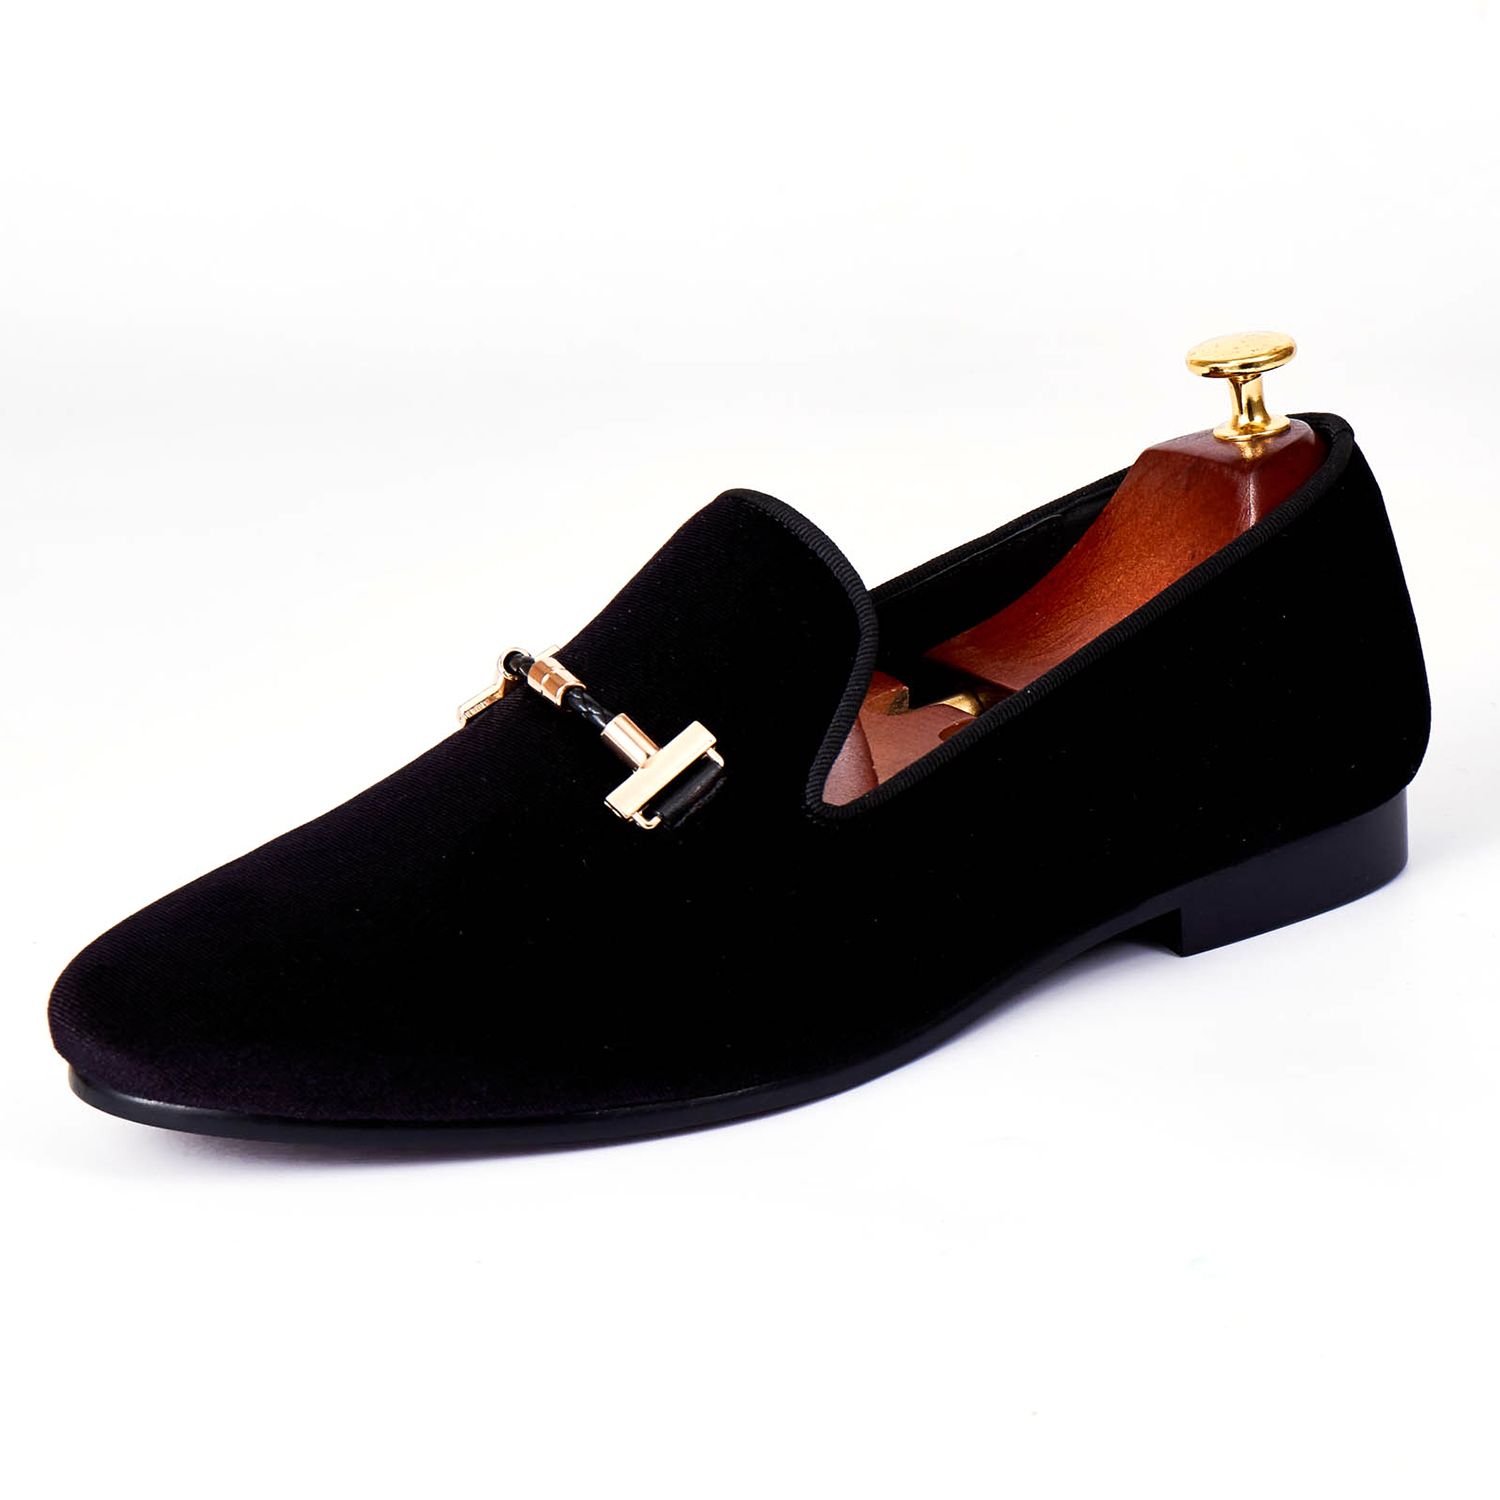 black dress shoes with gold